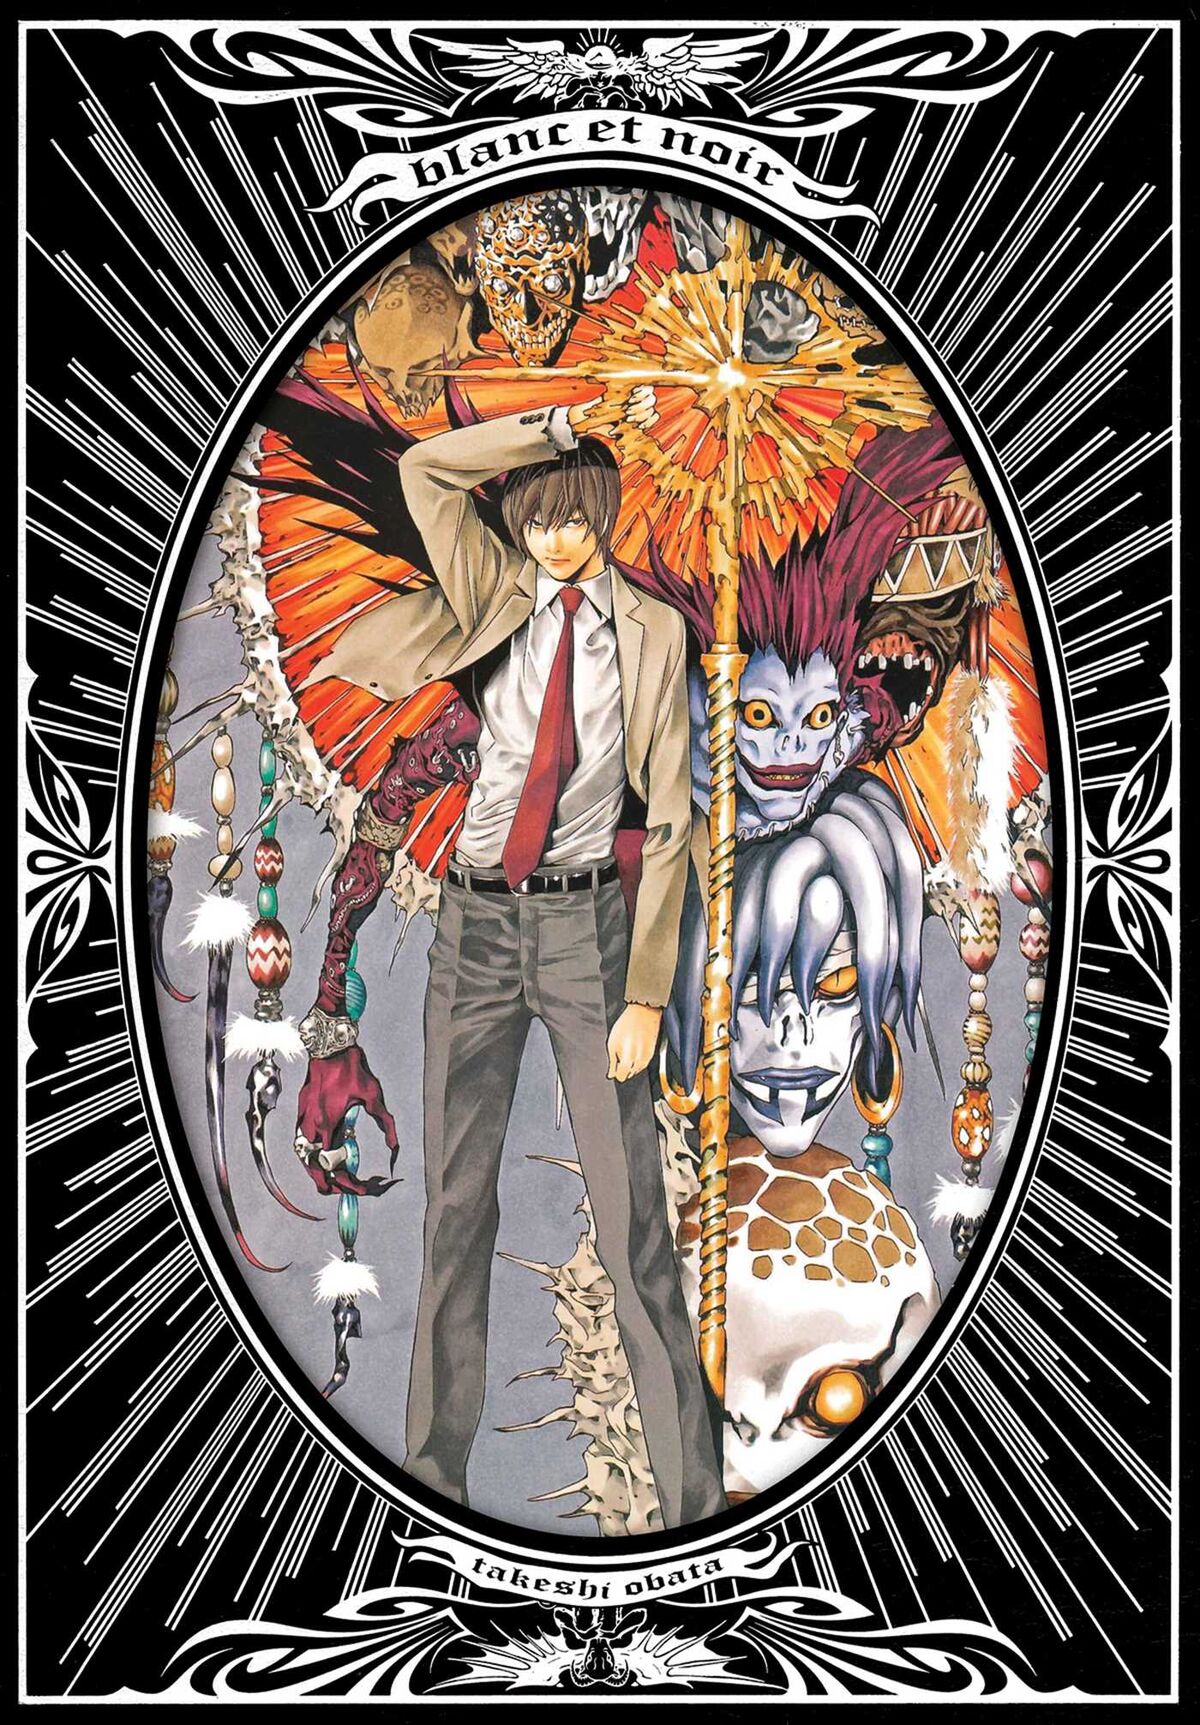 Death Note, Chapter 22 - Death Note Manga Online